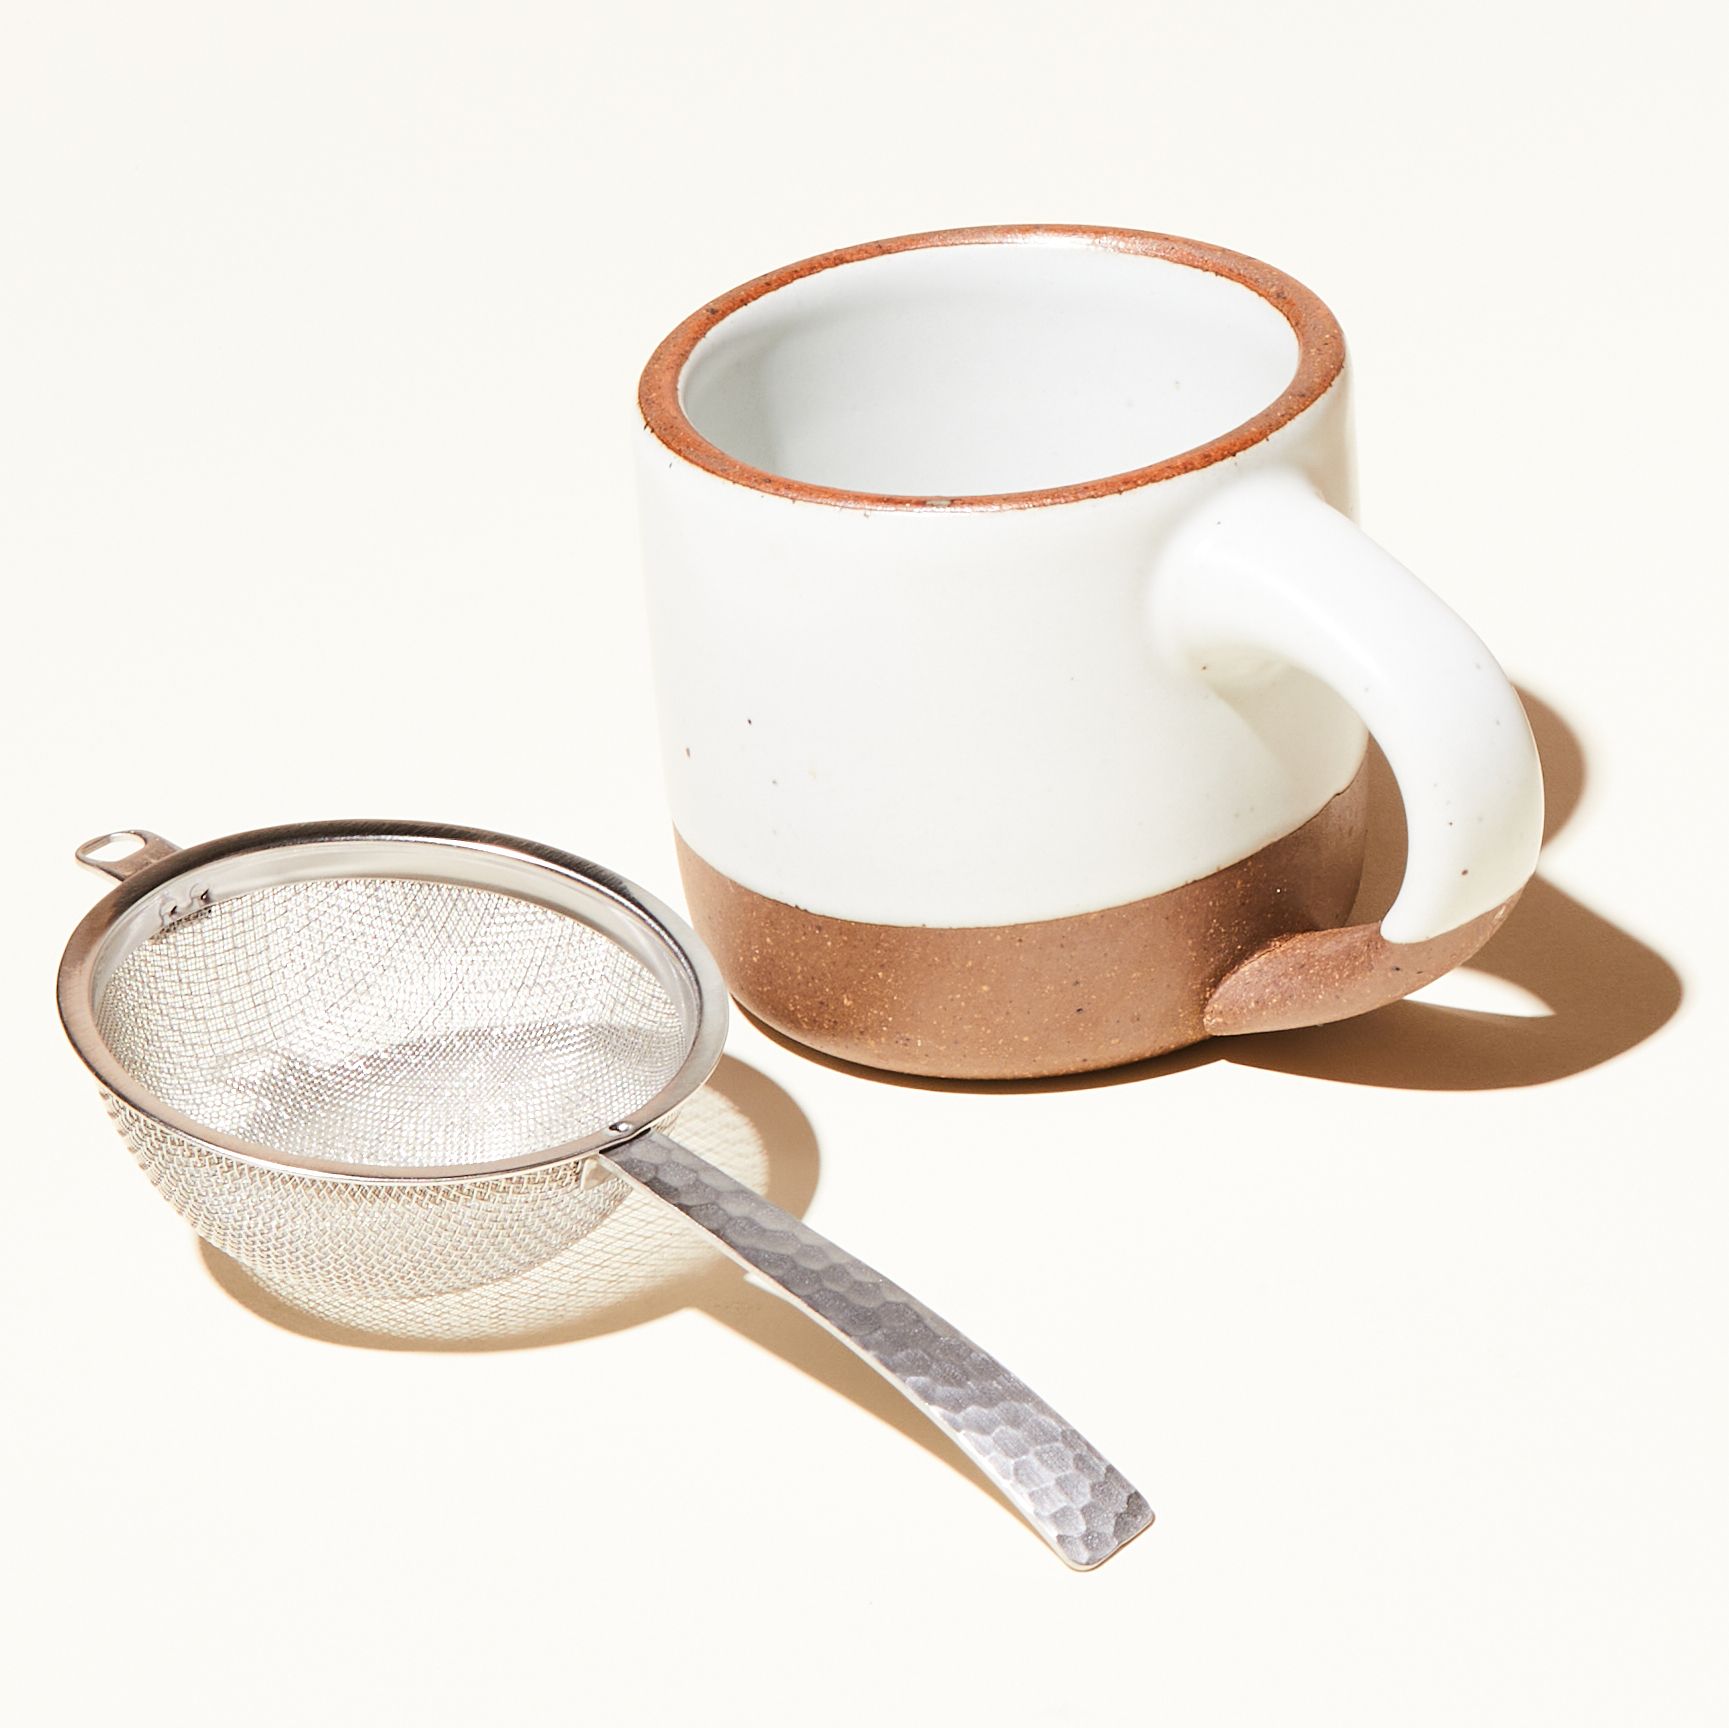 Stainless steel half dome strainer with steel handle laying next to The Small Mug in Eggshell